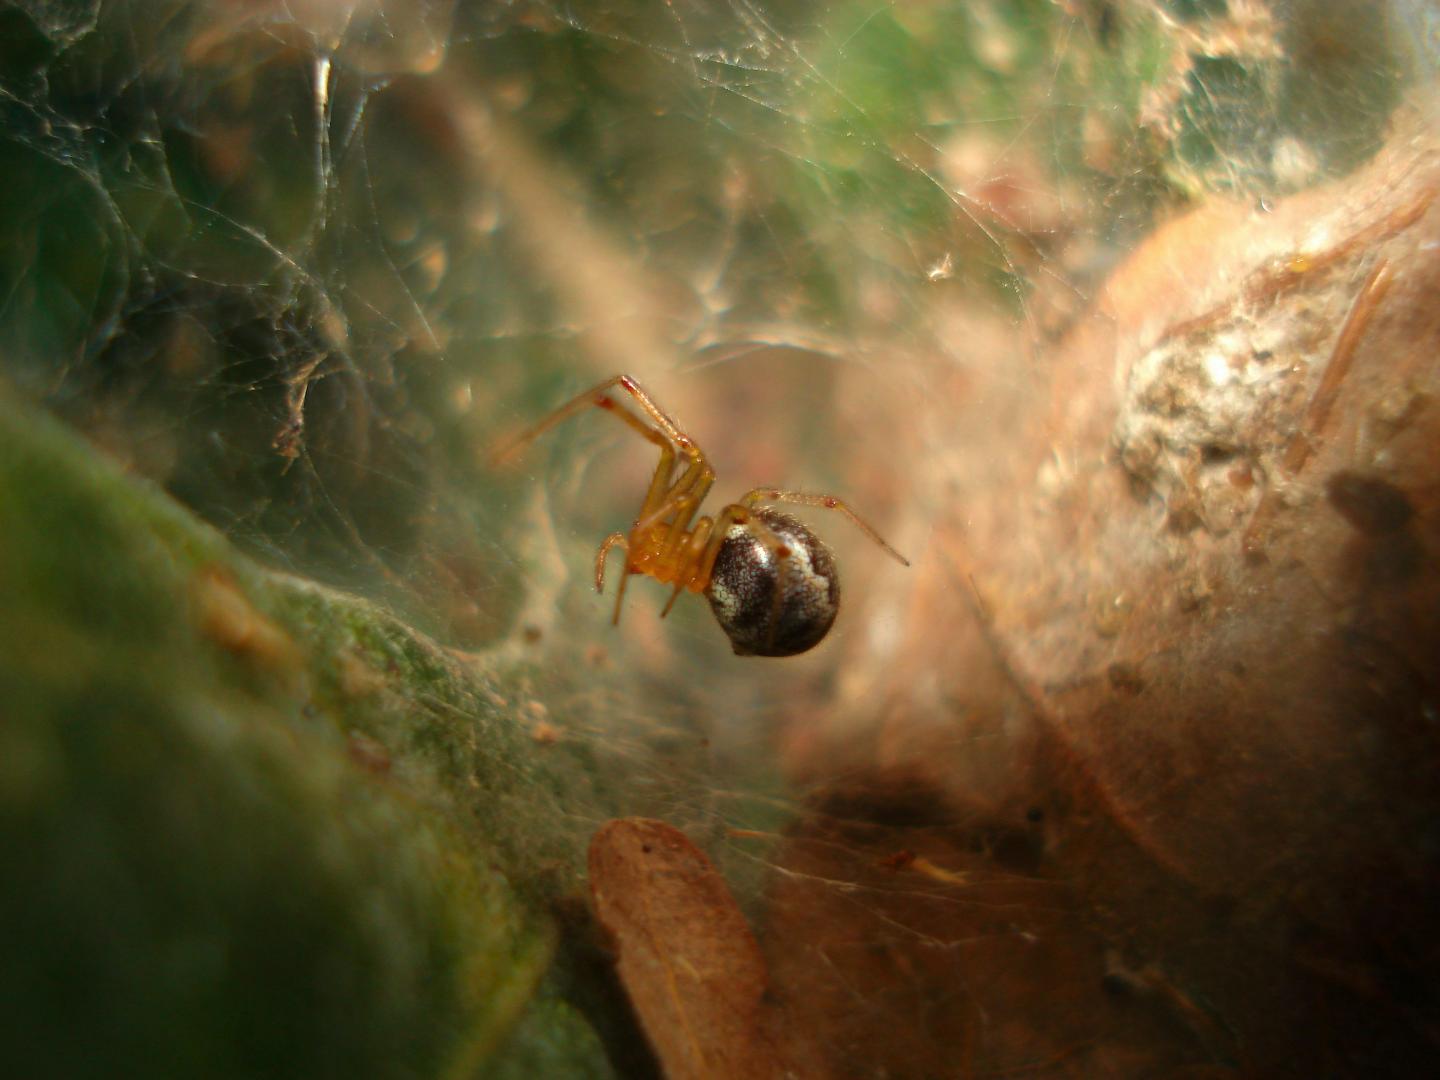 Researchers Find Hurricanes Drive the Evolution of More Aggressive Spiders